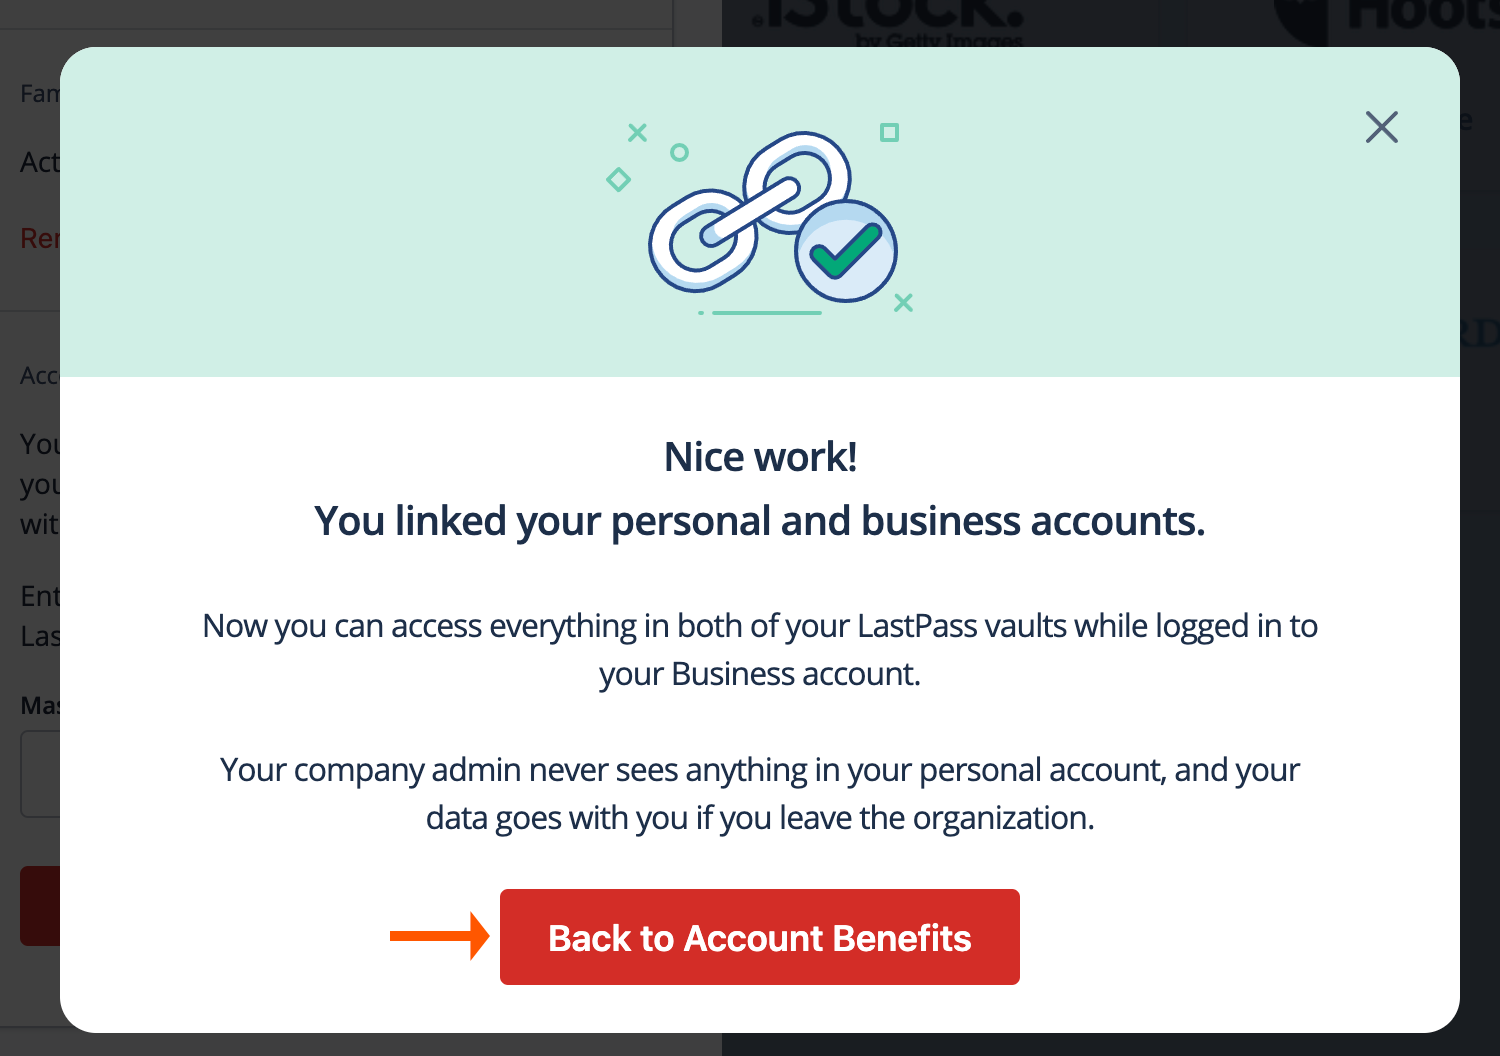 Select Back to Account Benefits